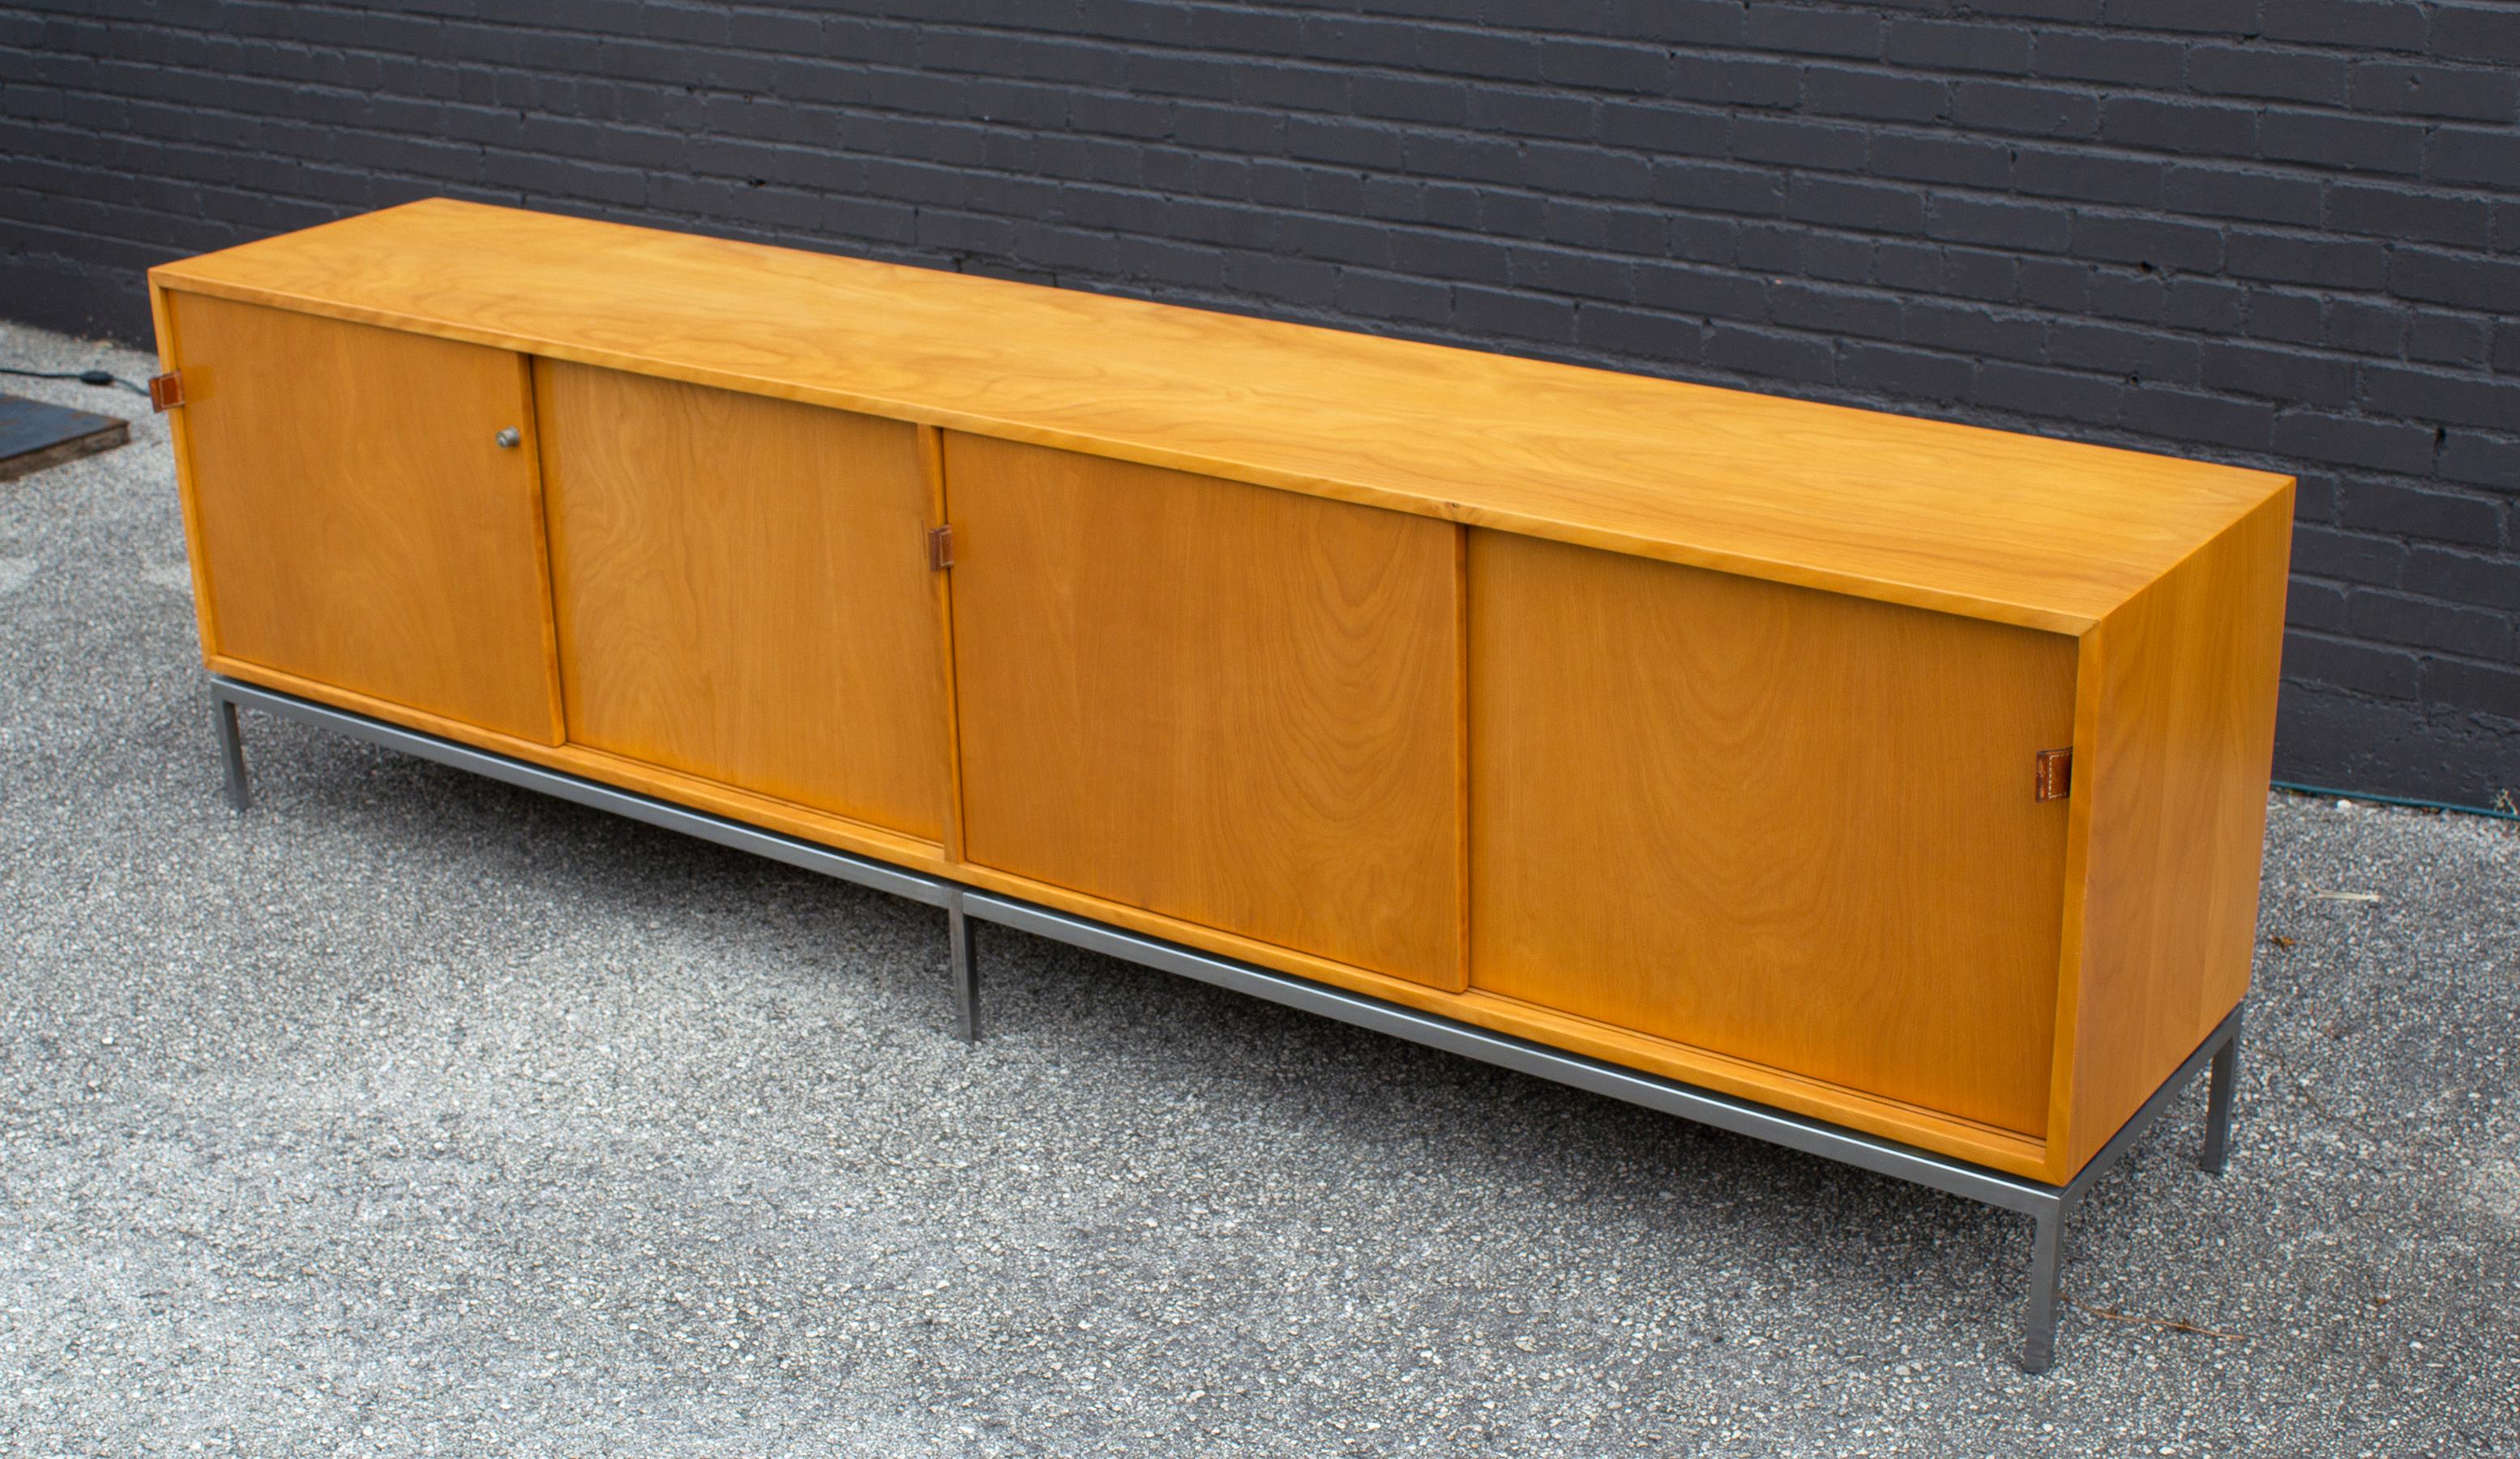 Florence Knoll Maple Credenza with Leather Pulls and Oak Drawers Early 1950s For Sale 2